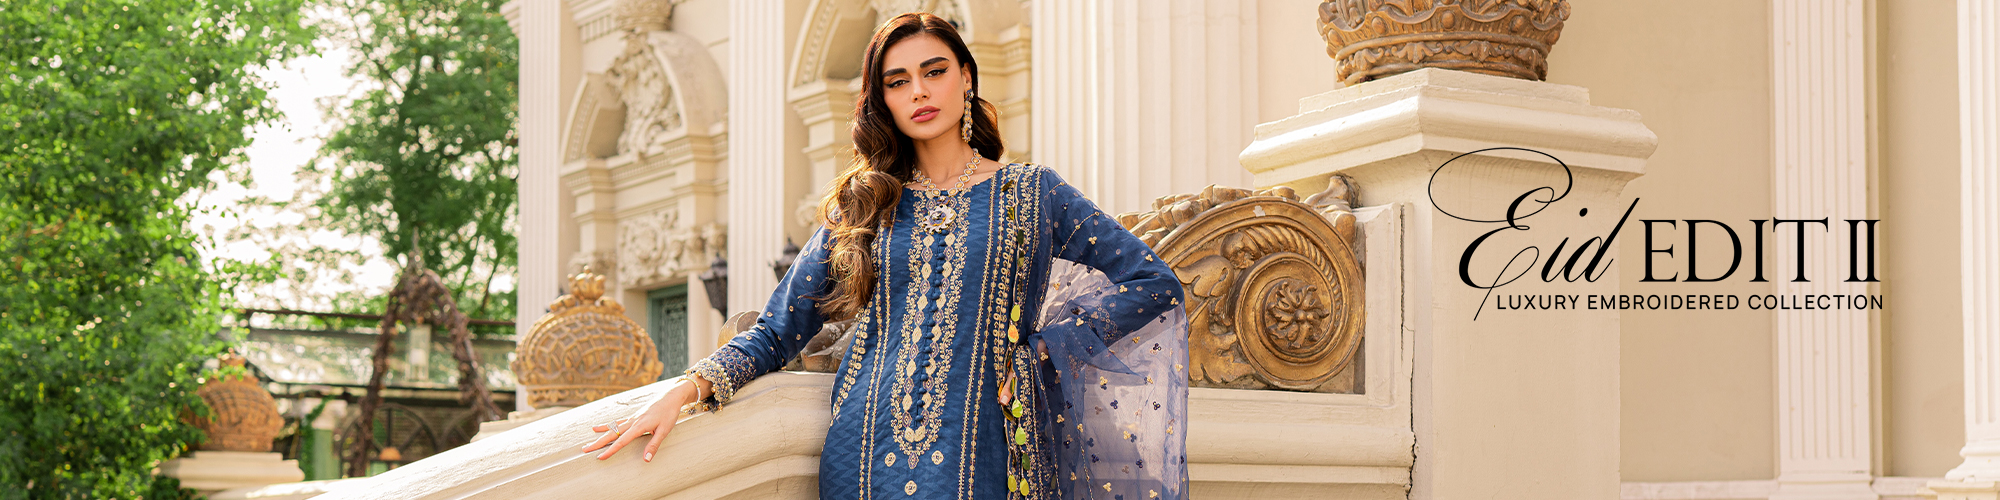 Luxury Embroidered Collection